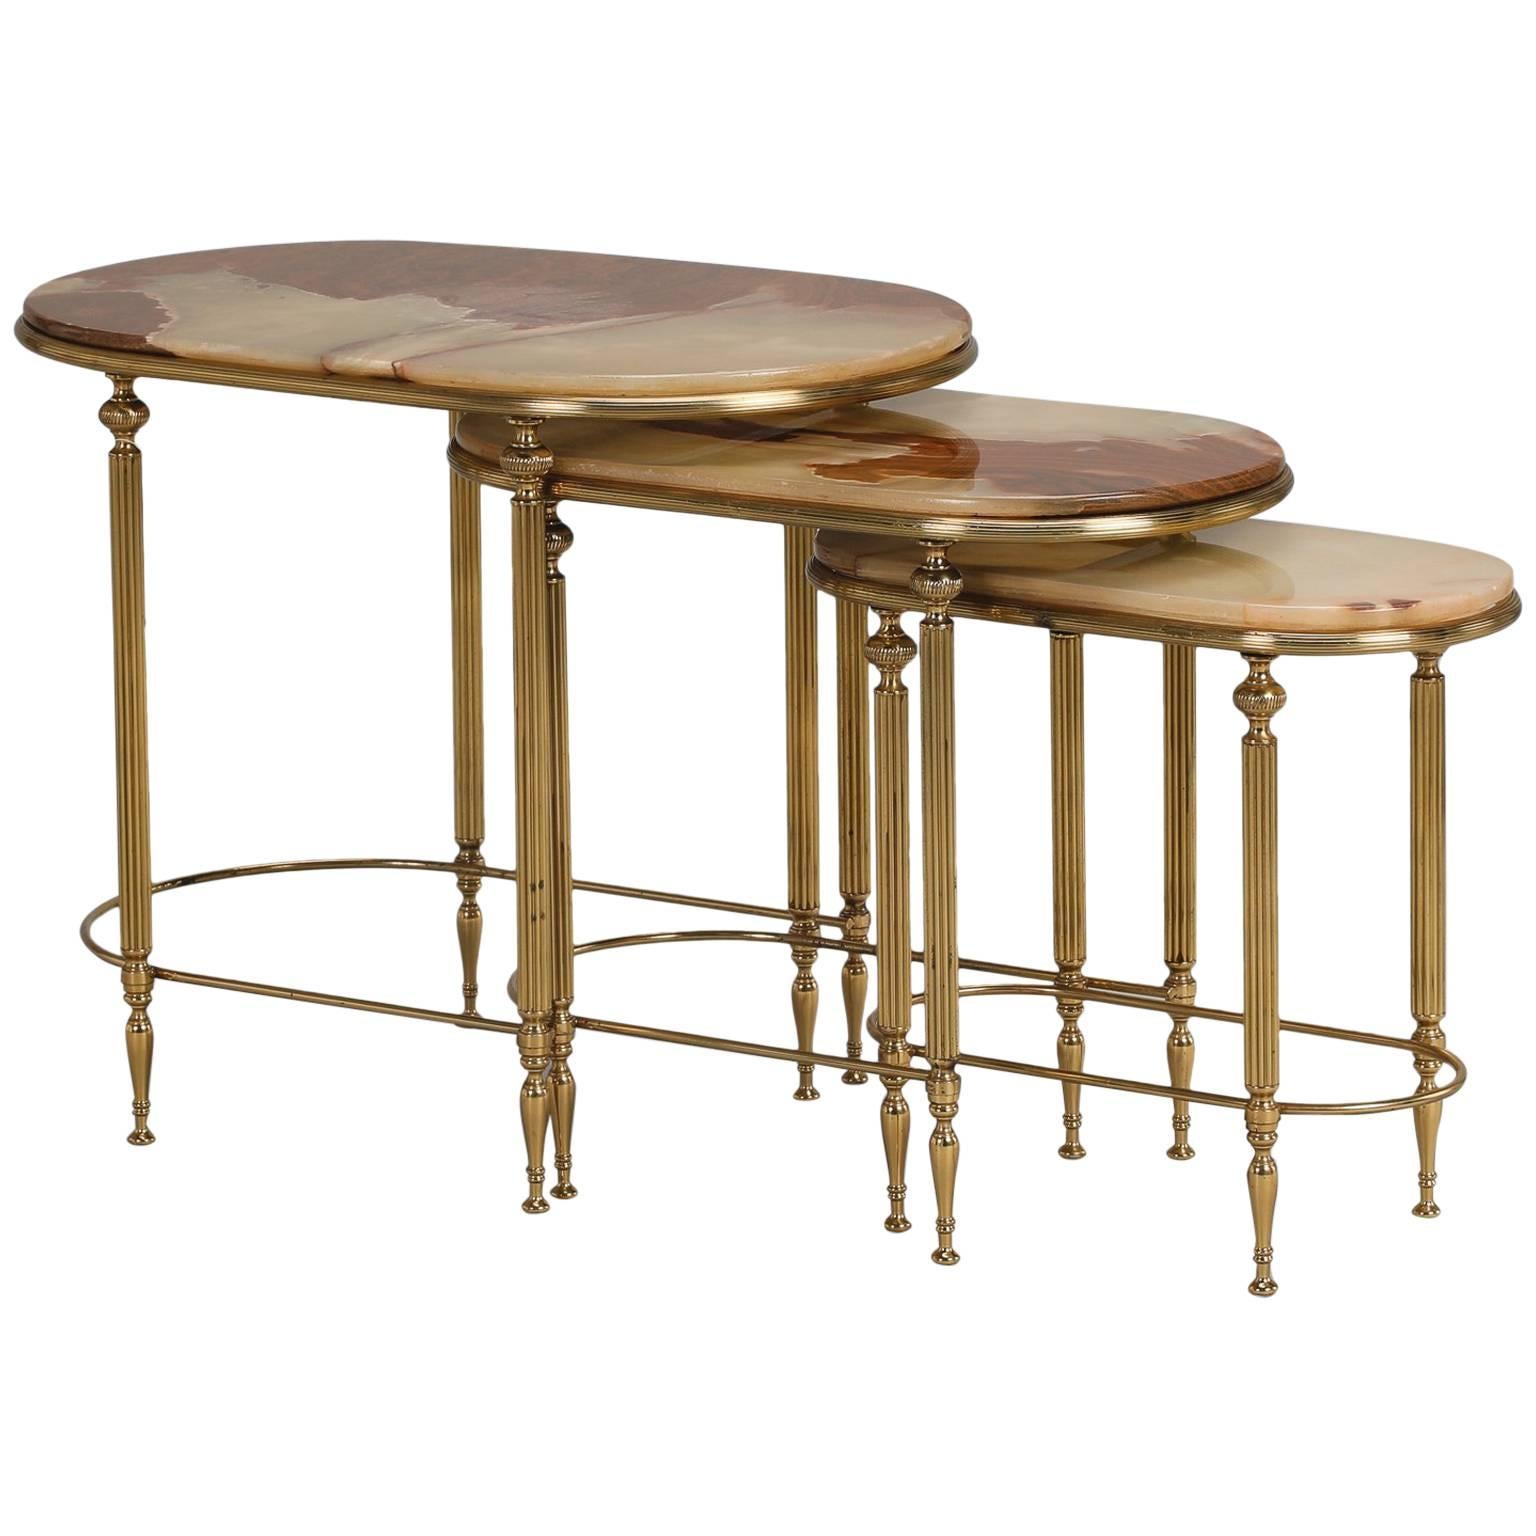 Trio of Stacking Onyx and Brass Tables